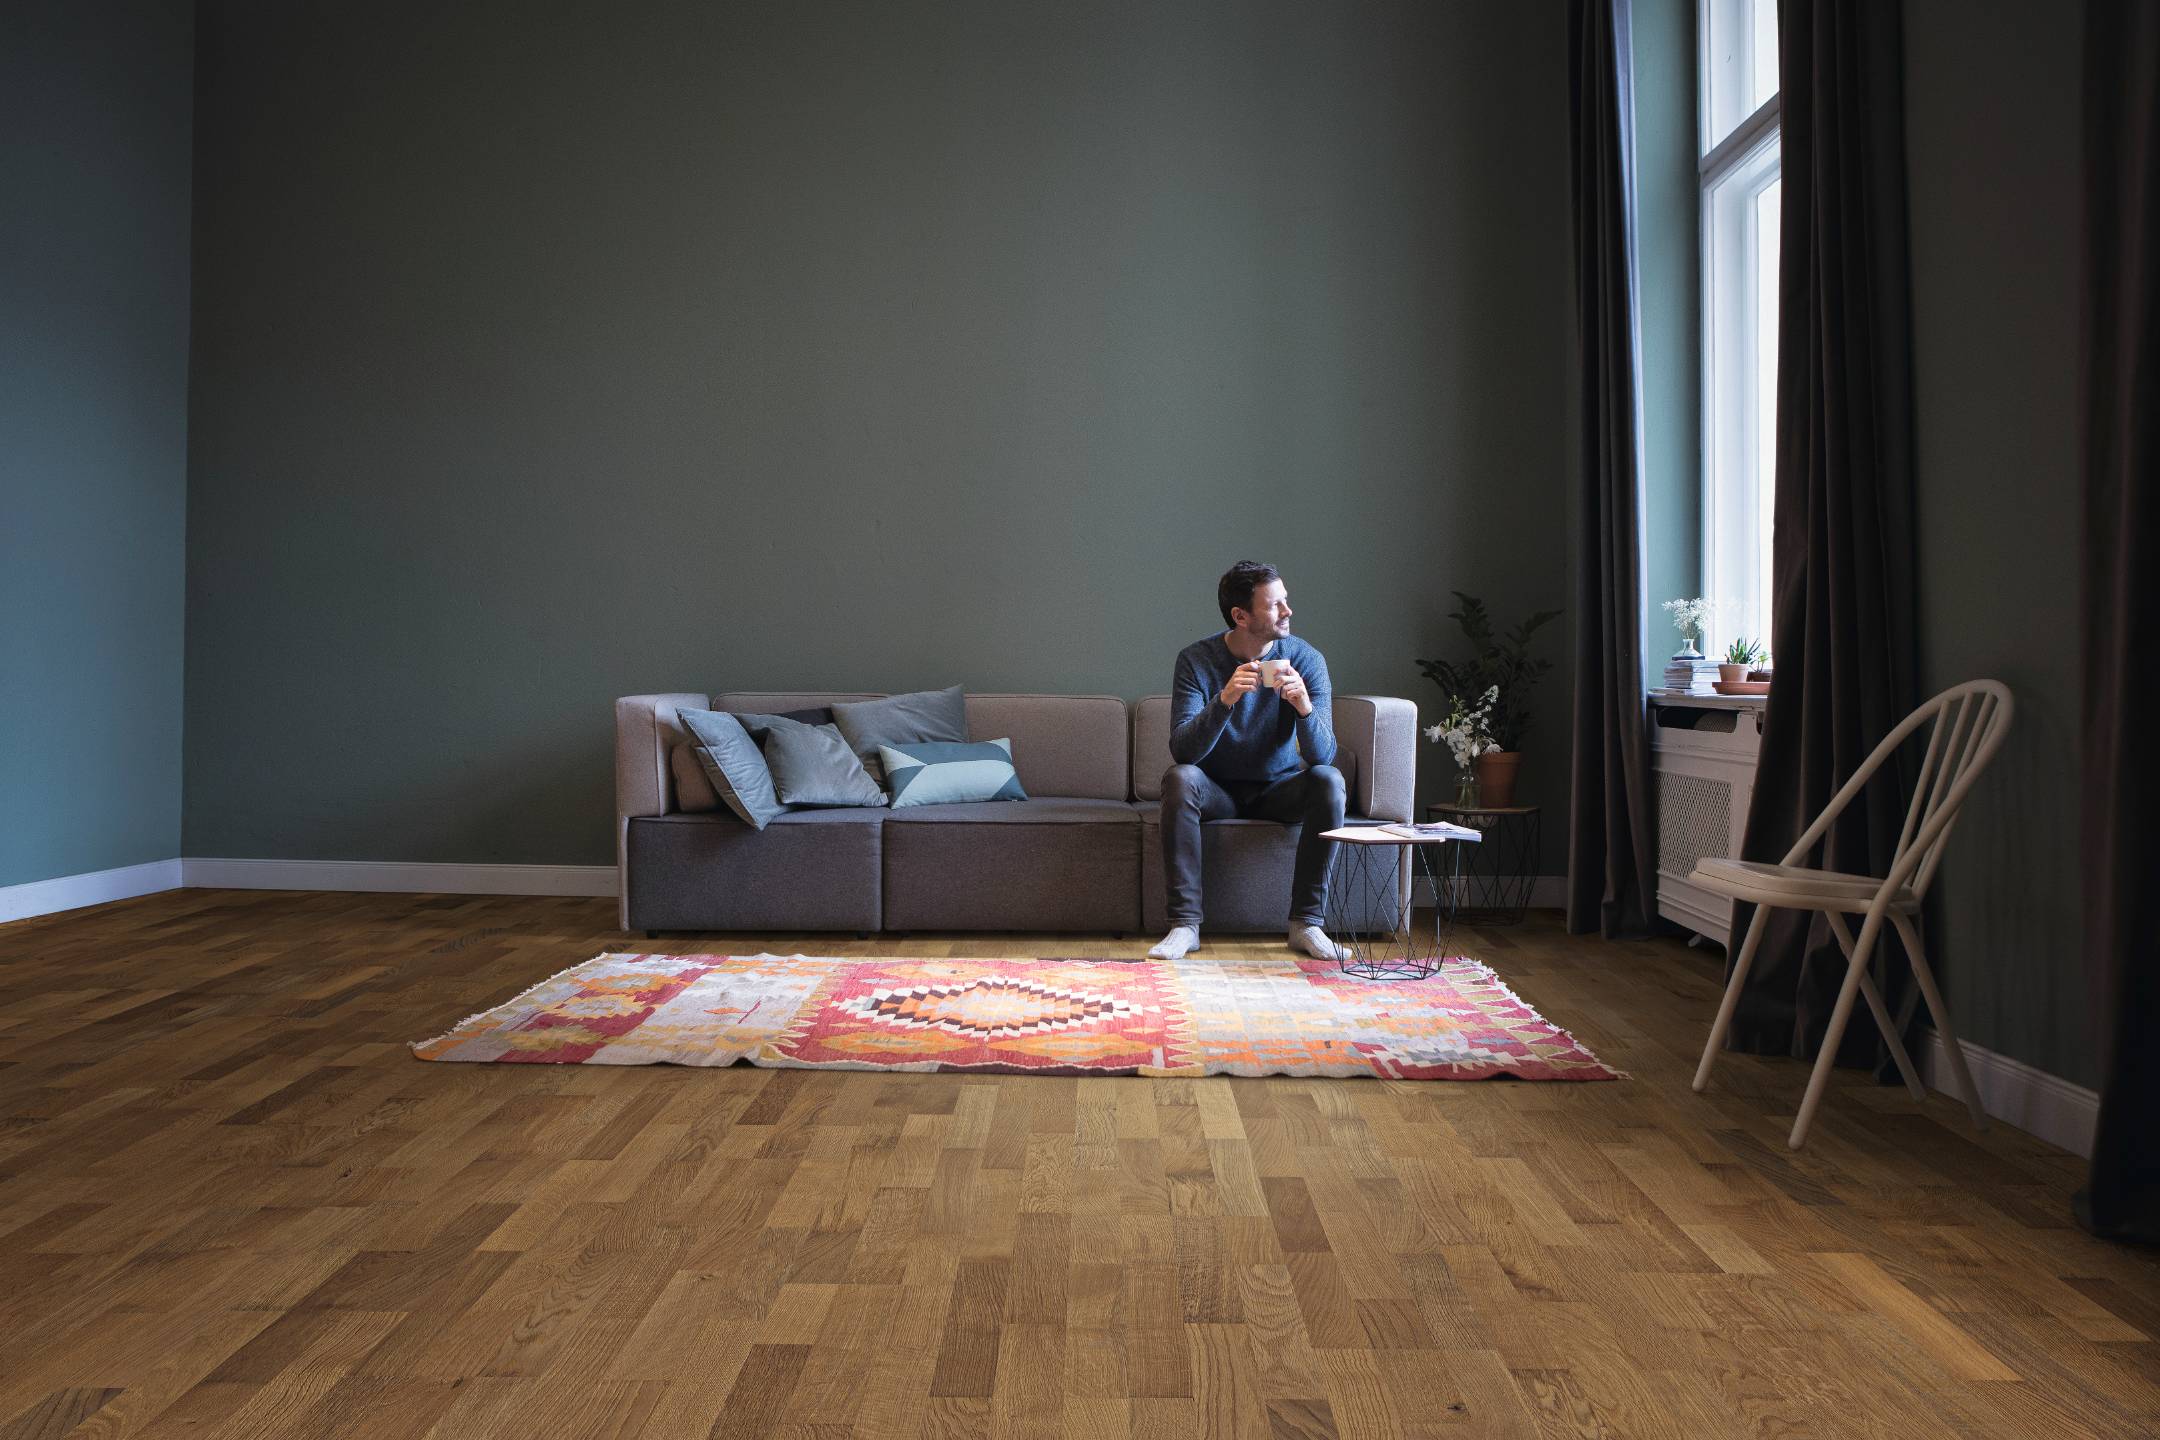 HARO Parquet offers a wide range of beautiful wooden floors.